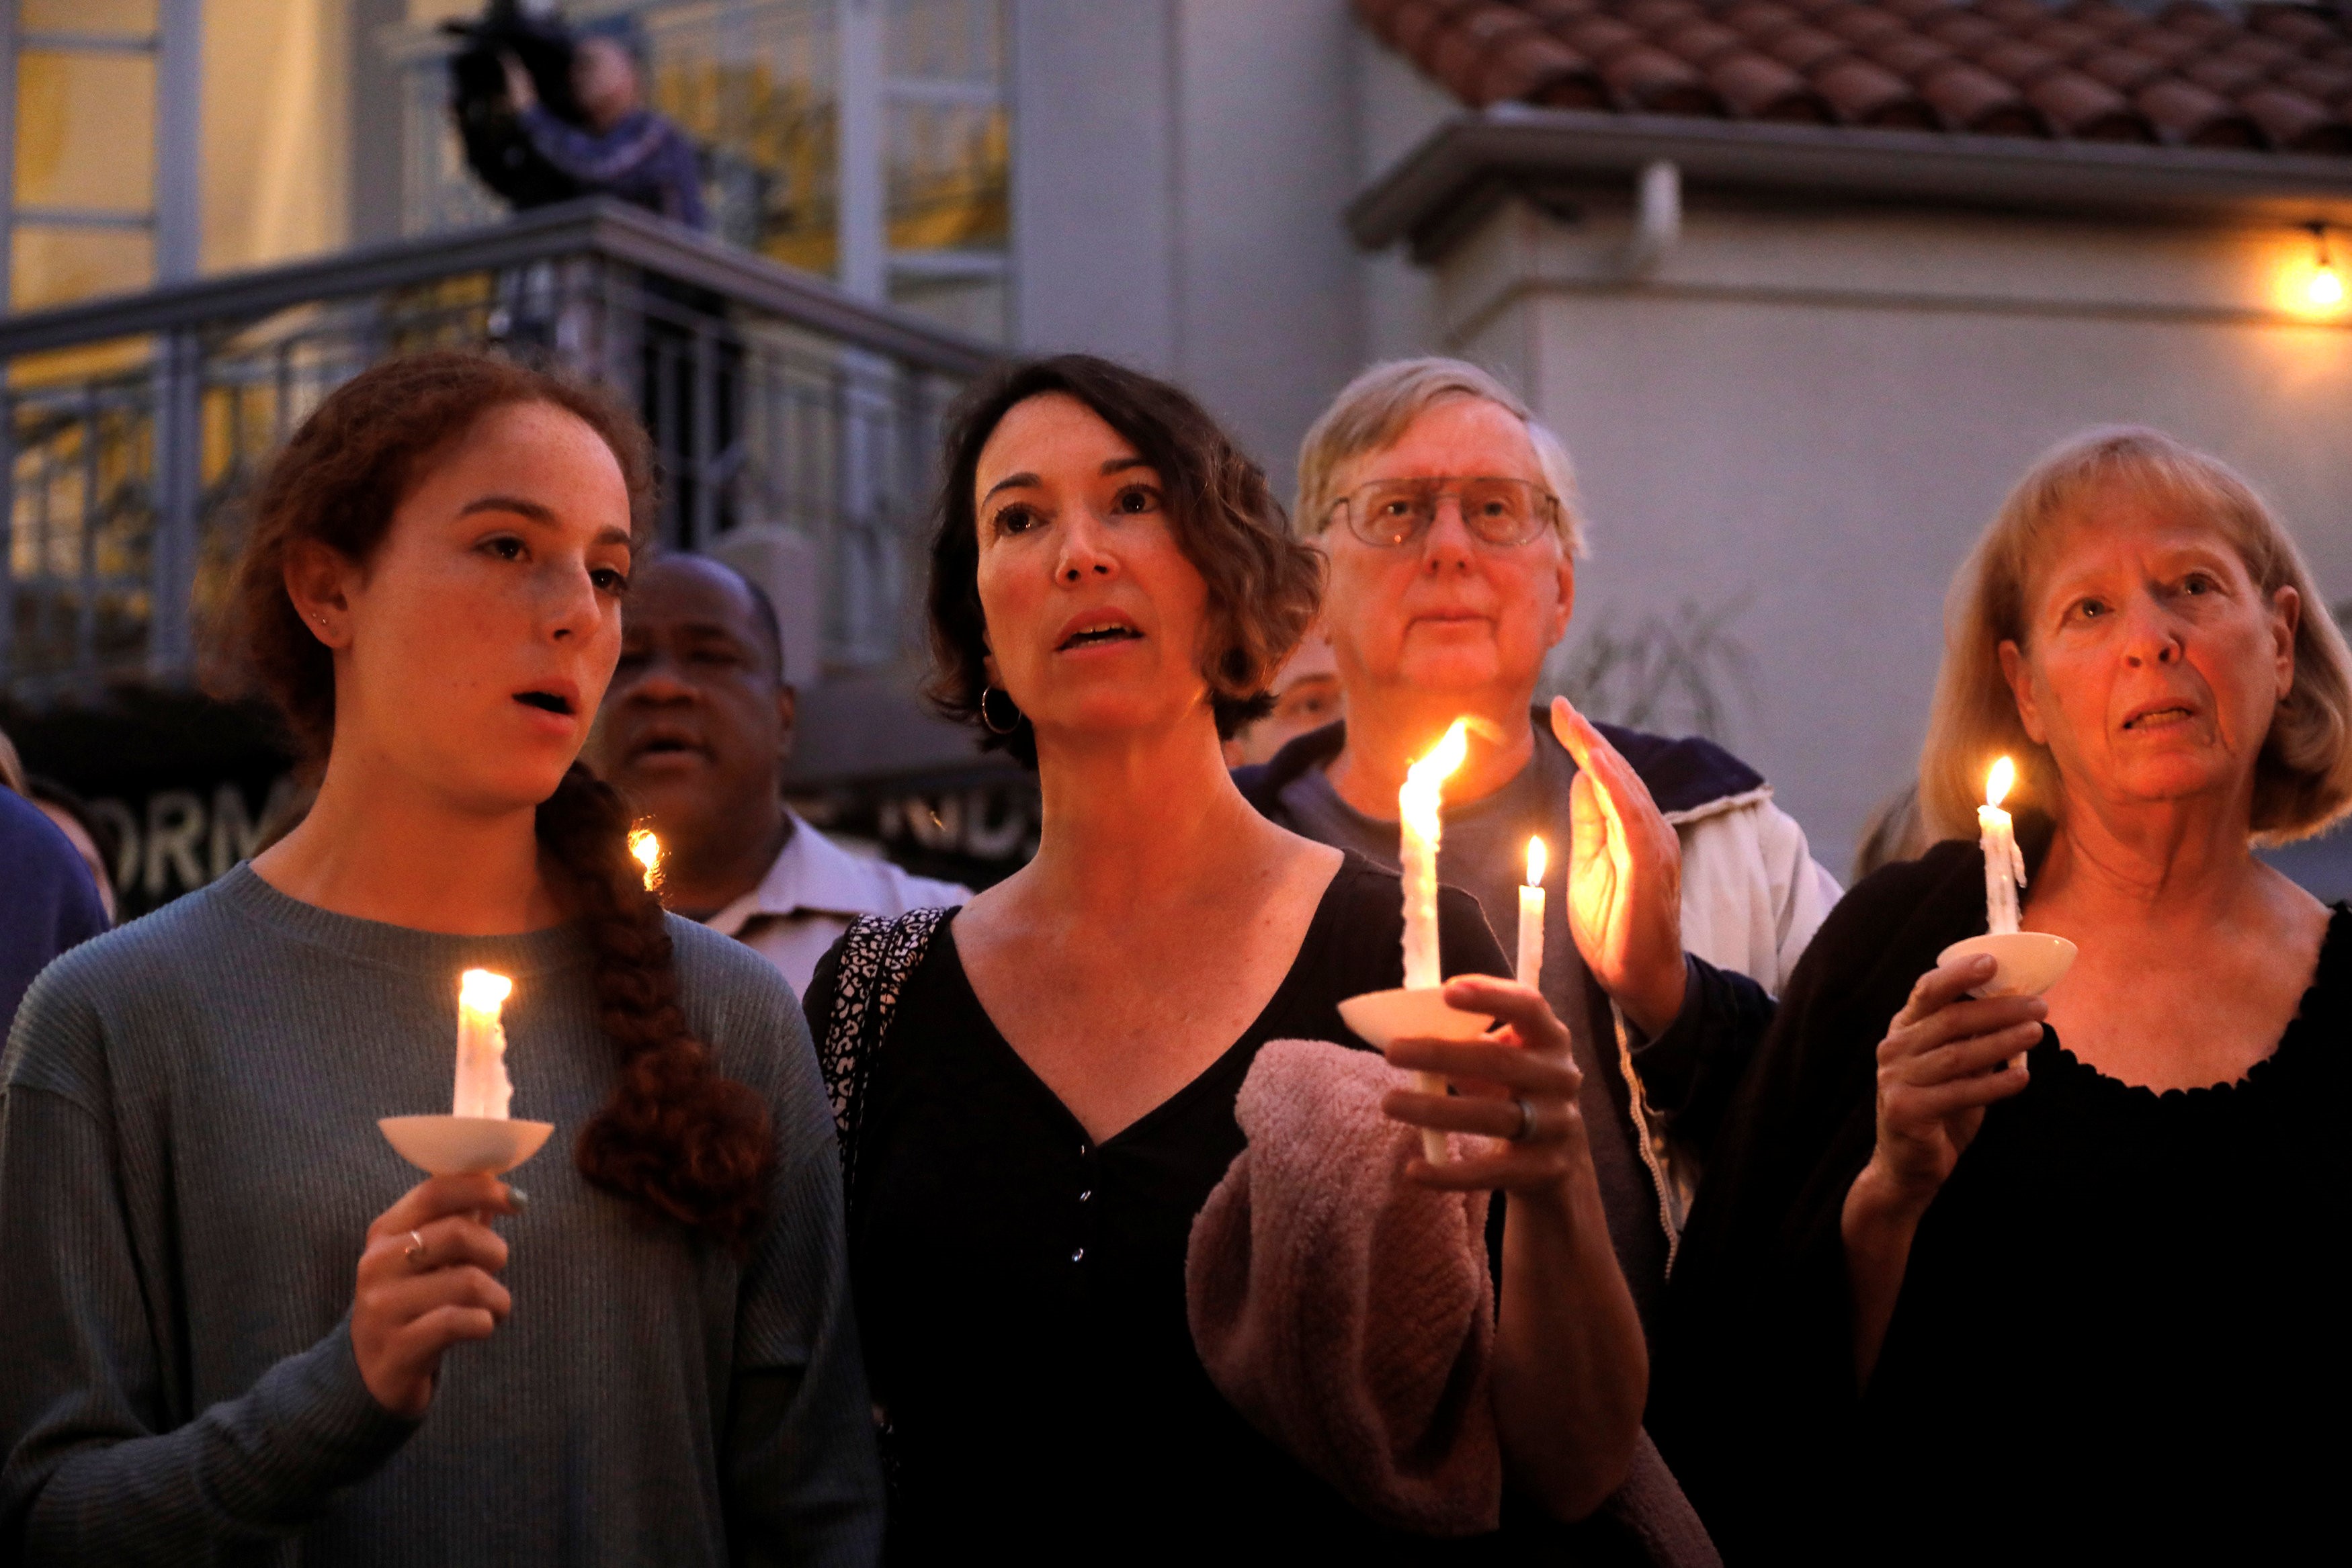   A candlelight vigil is held at Rancho Bernardo Community Presbyterian Church for victims of a shooting incident at the Congregation Chabad synagogue in Poway on 27 April (Reuters)